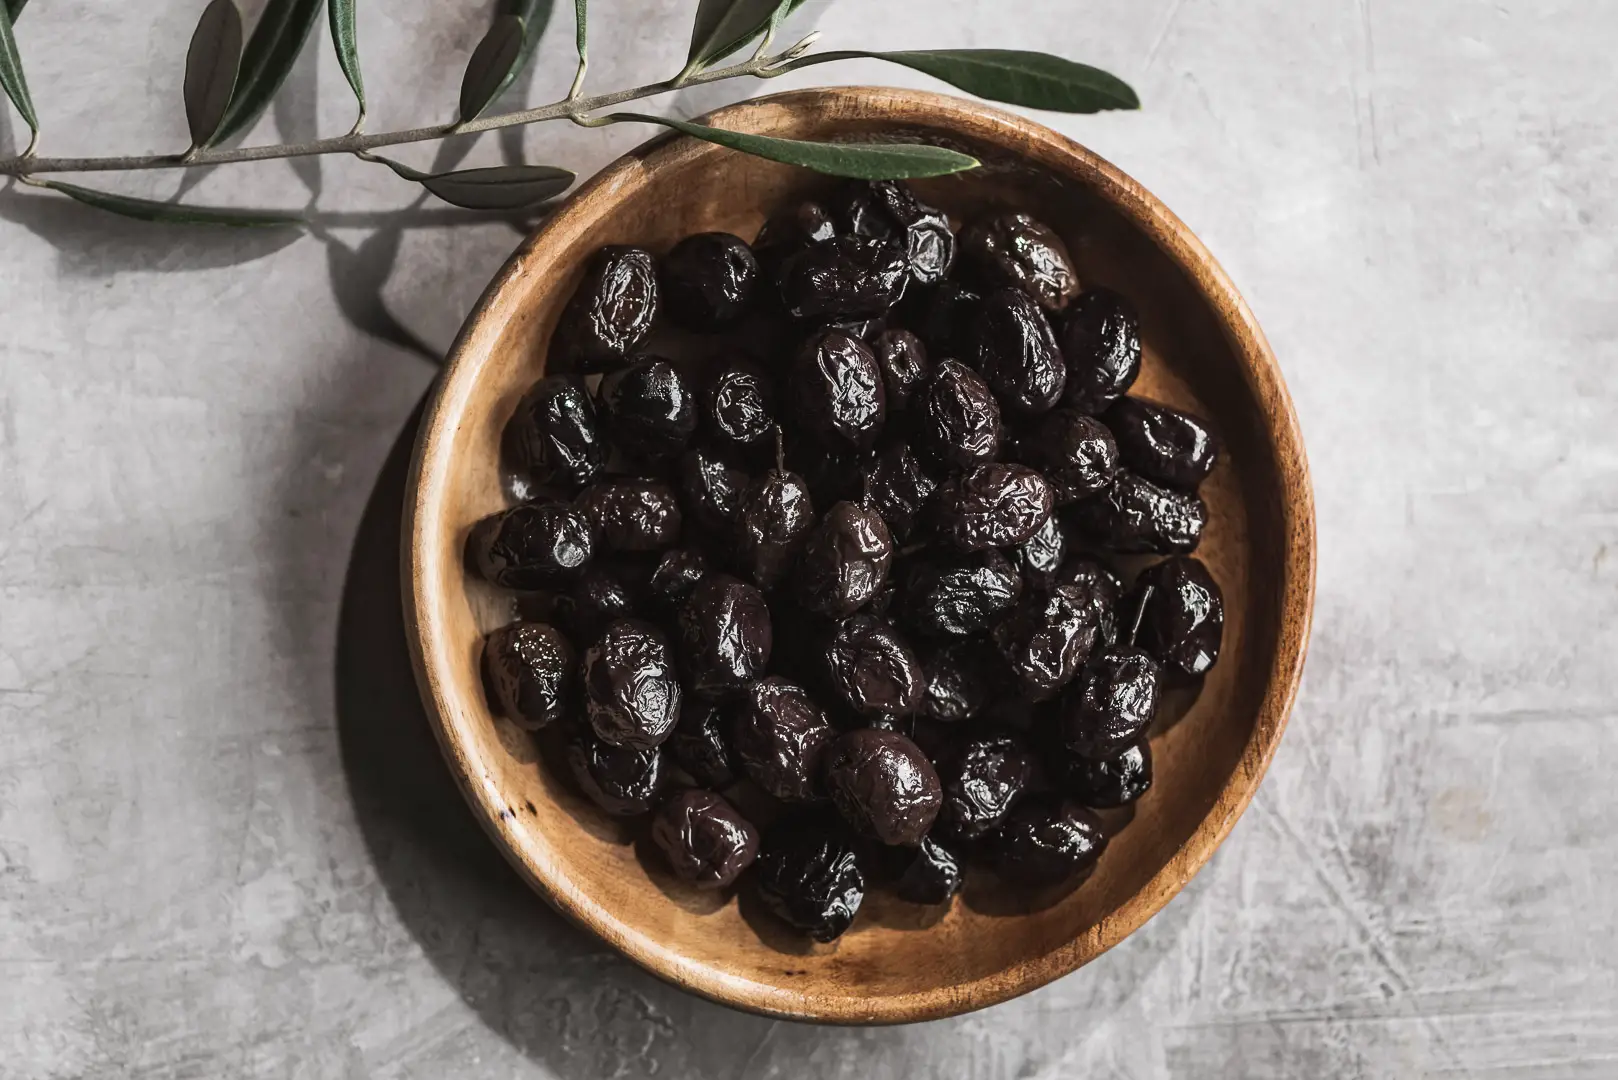 Throumbes olives from the Greek island of Thassos